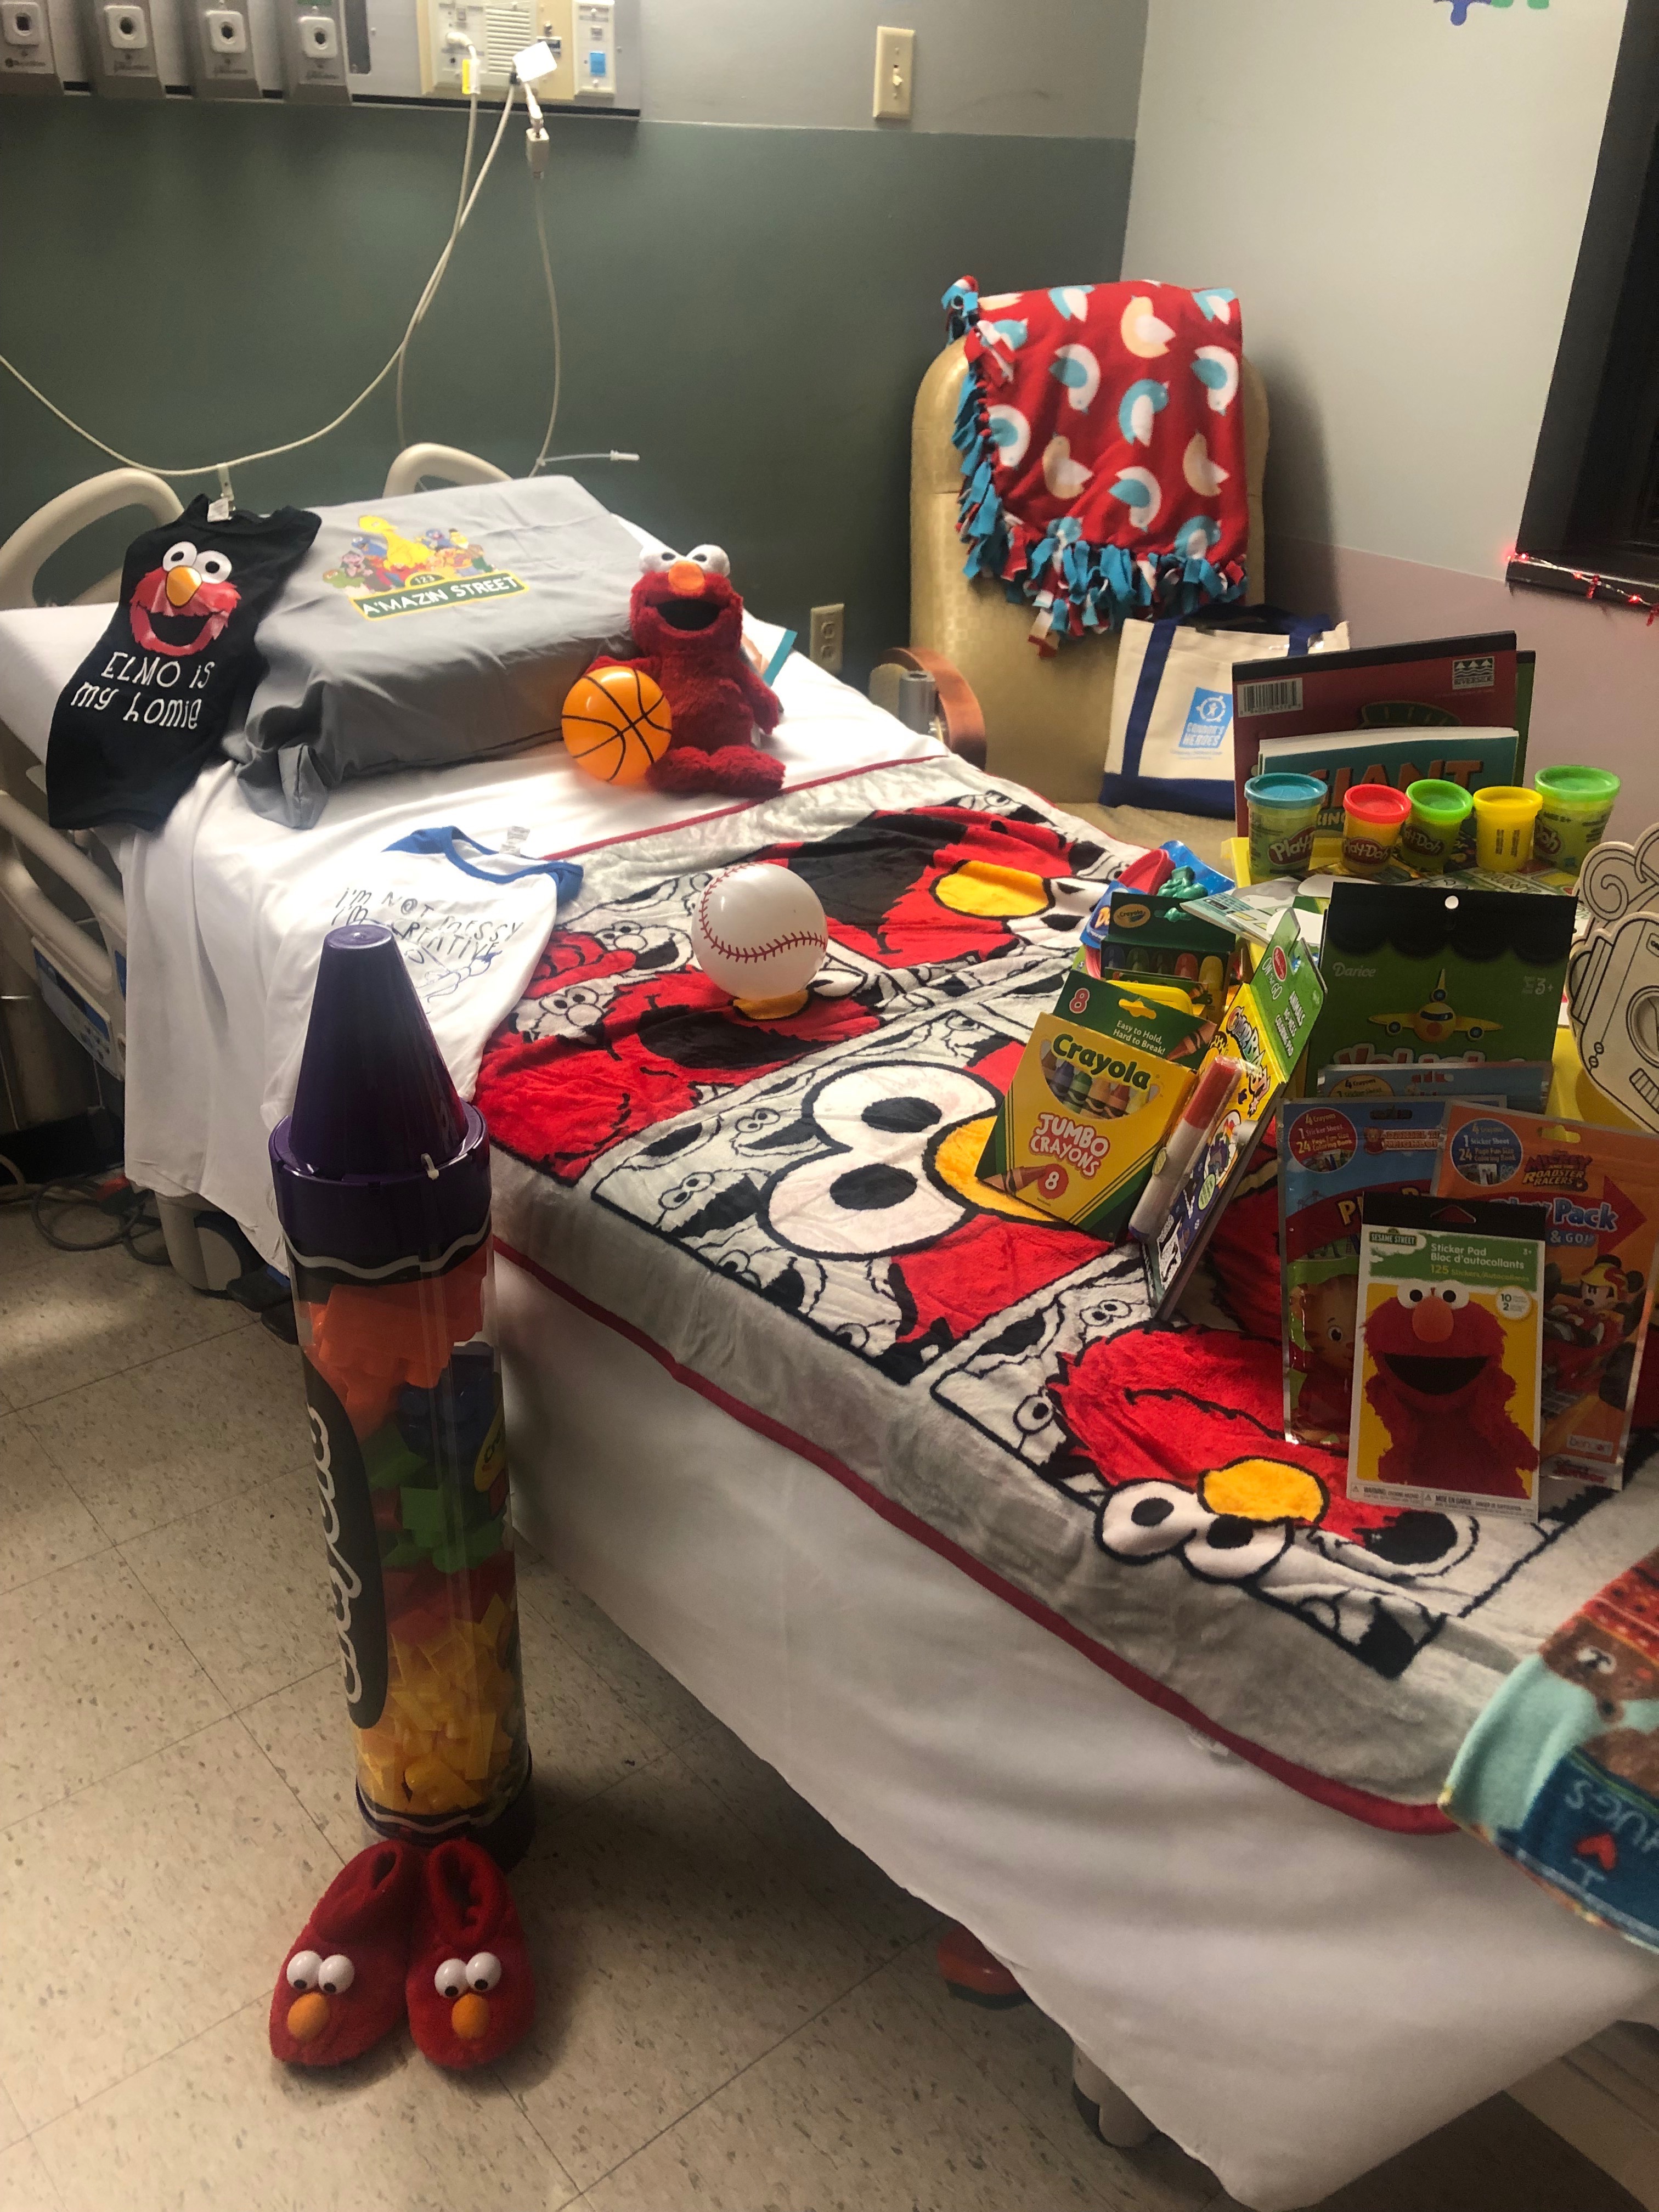 Hospital bed covered with Elmo blanket and Elmo coloring books